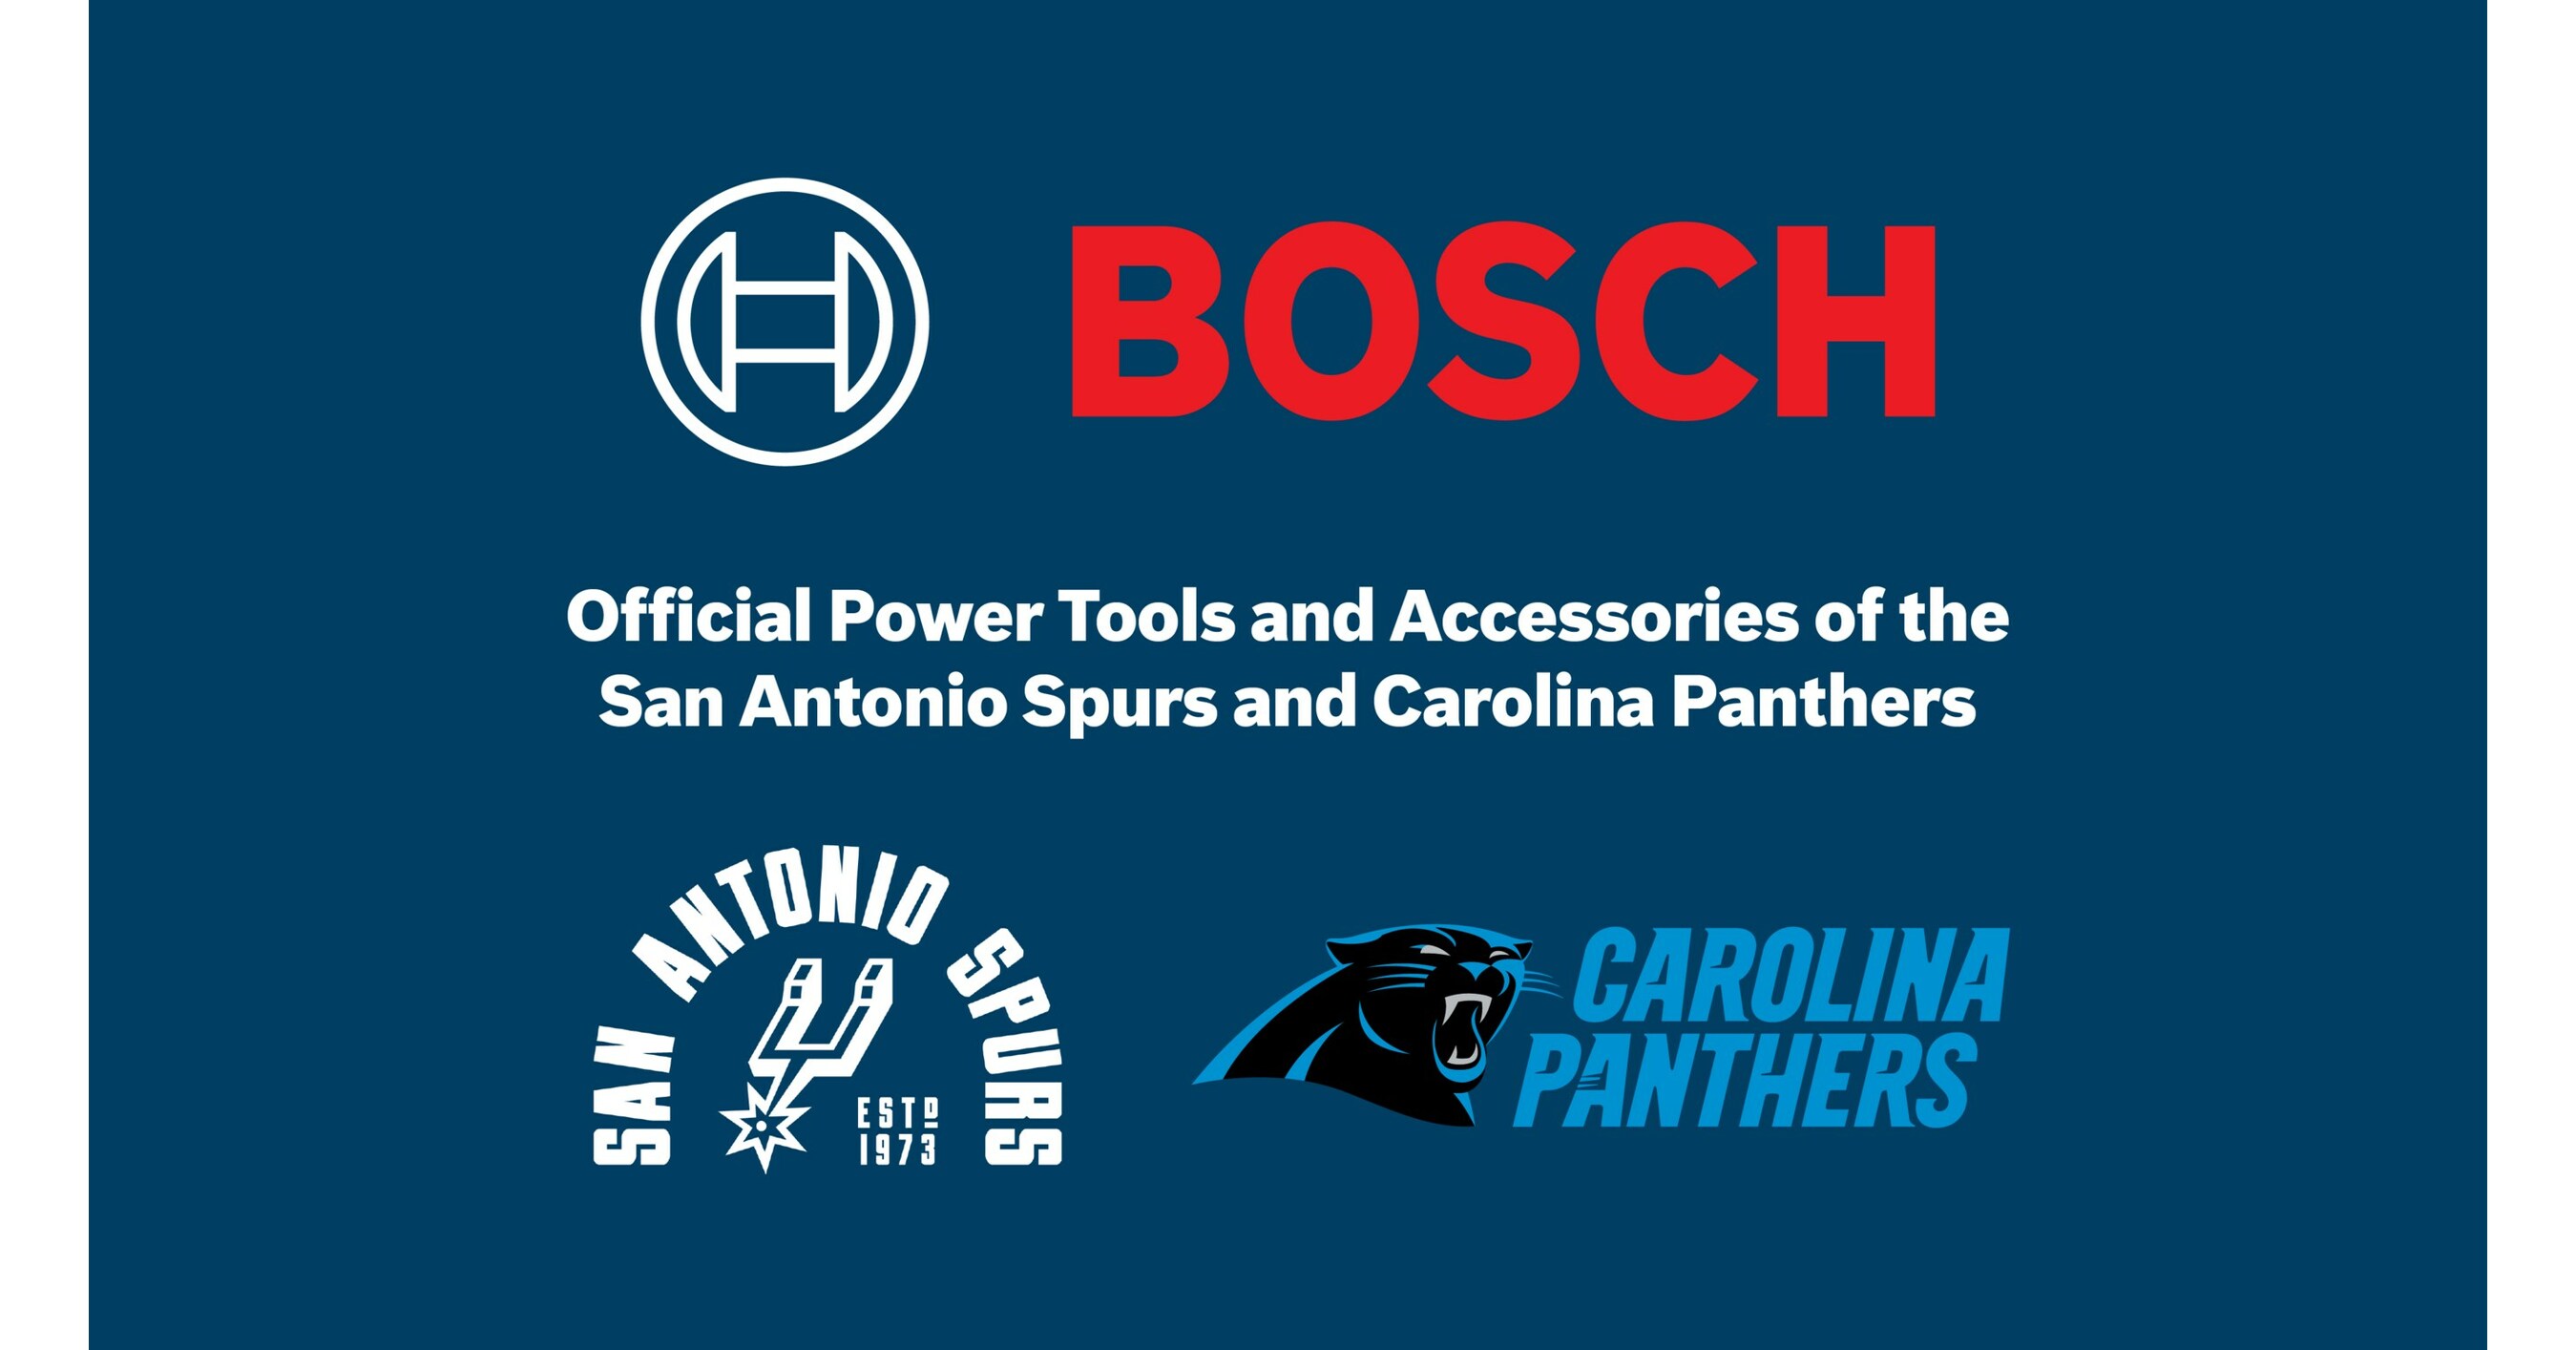 Bosch Power Tools Supports Local Communities by Partnering with NFL  Carolina Panthers & NBA San Antonio Spurs